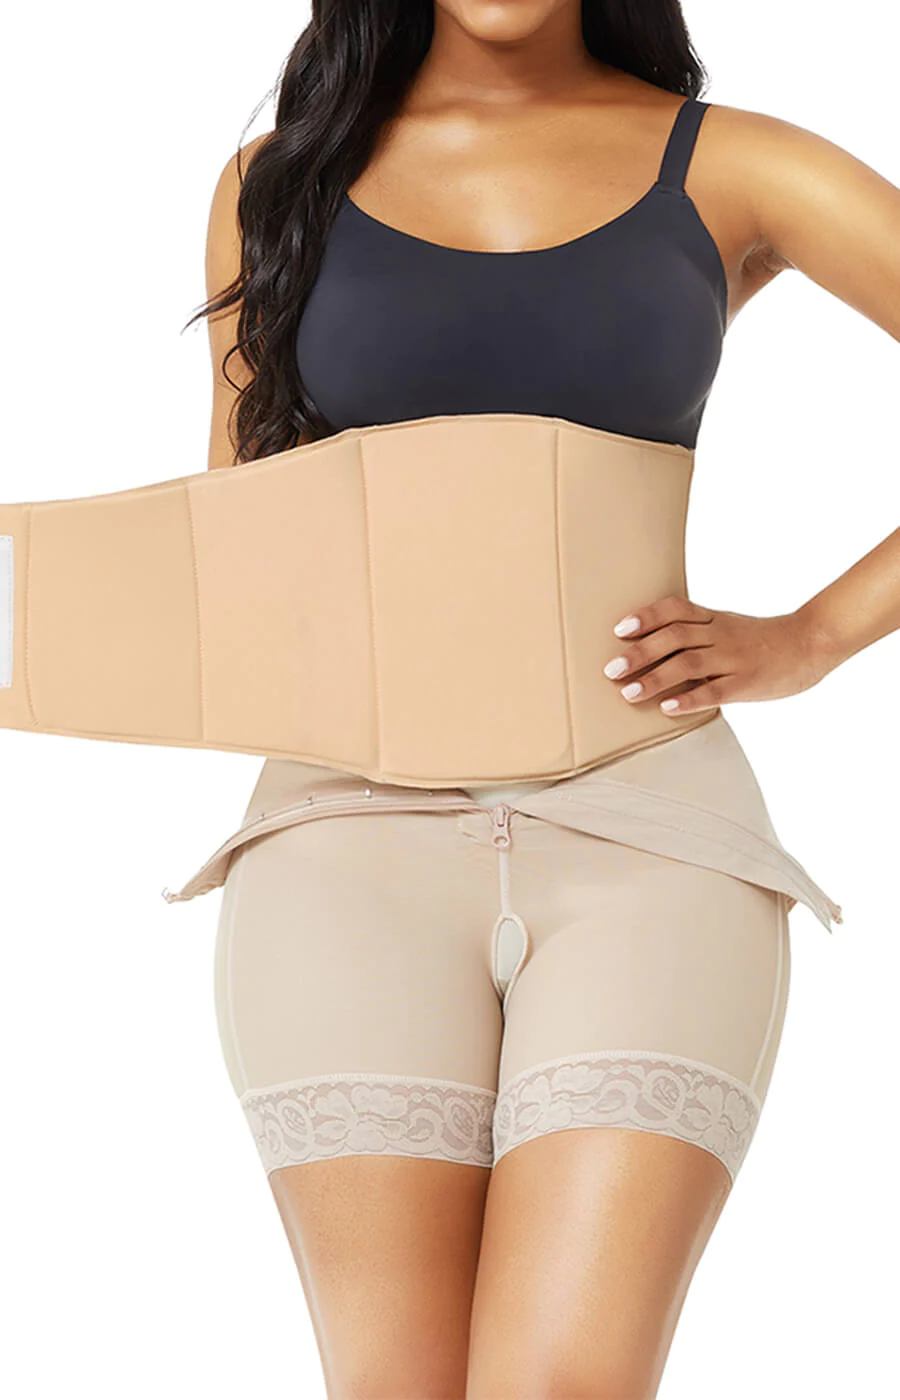 13 Features to Look for to Find the Best Postpartum Shapewear